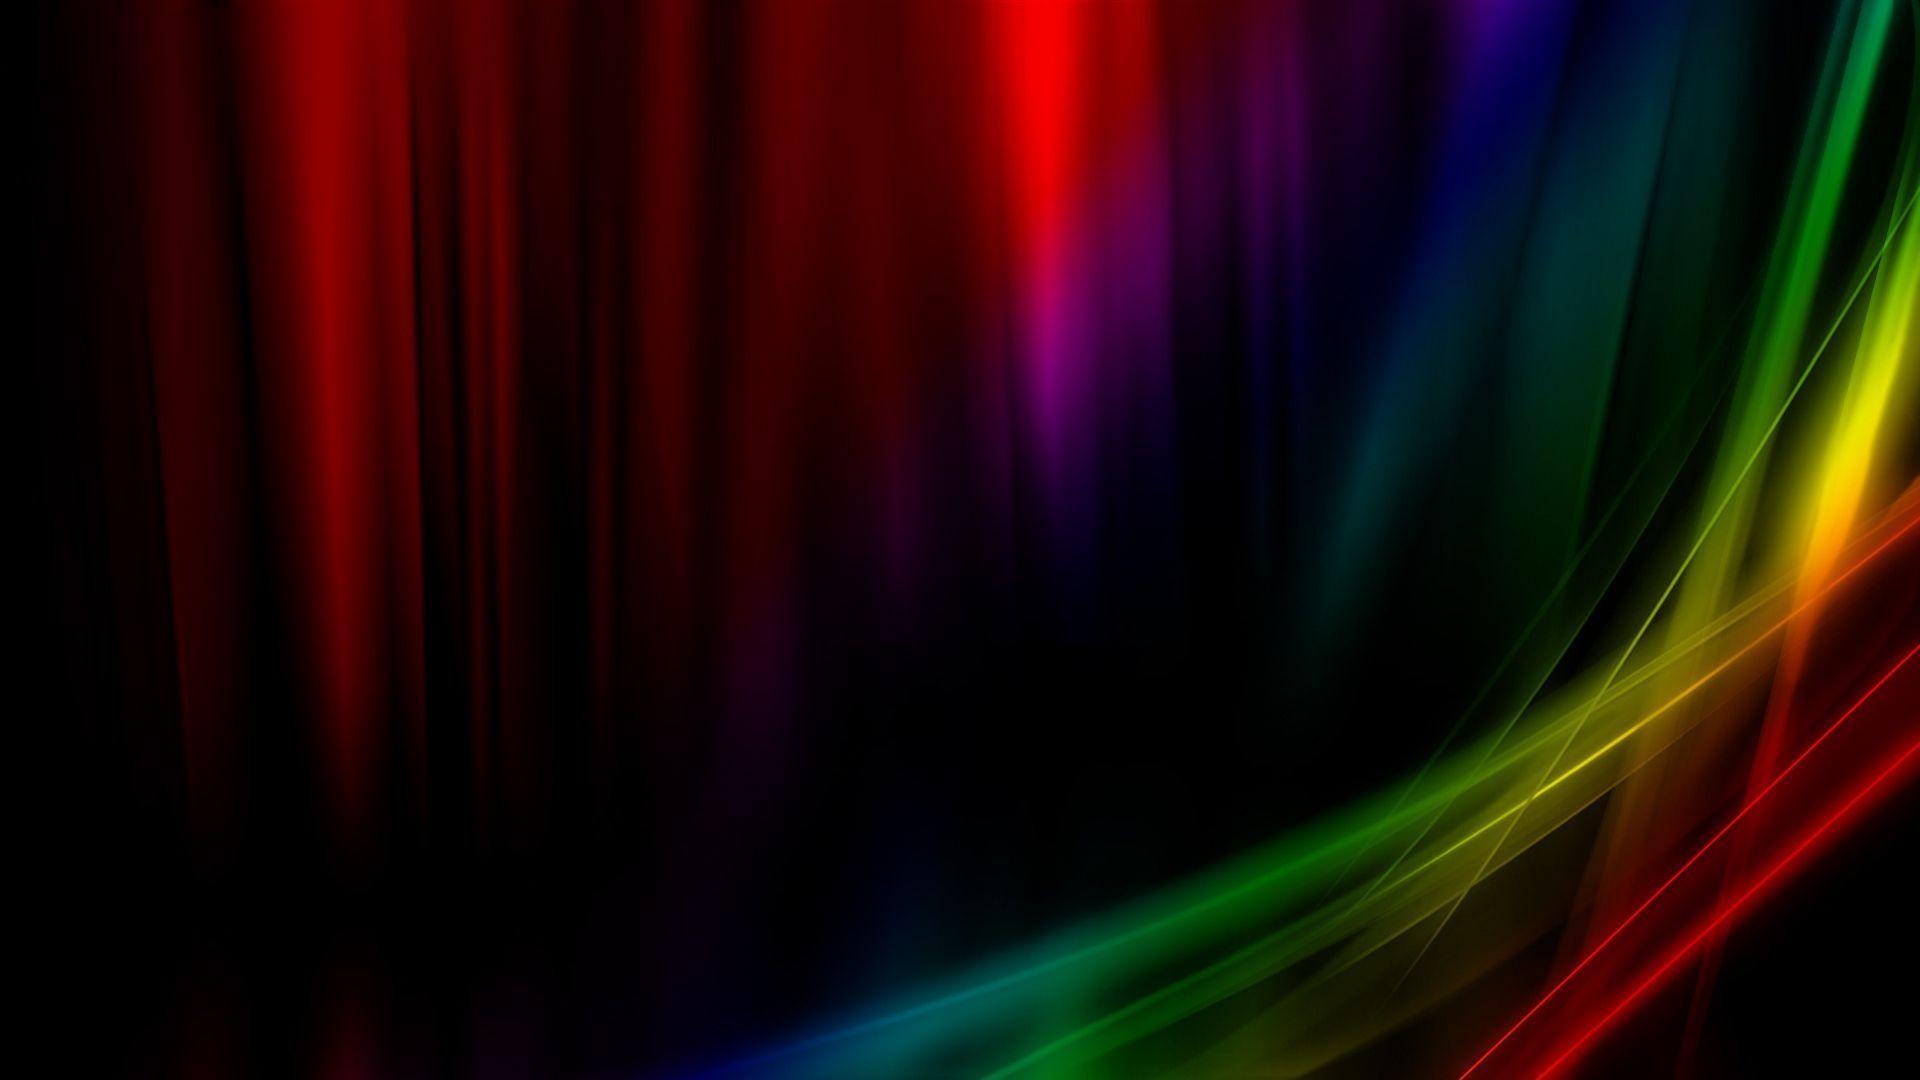 Wallpaper For > Bright Colored Background Tumblr